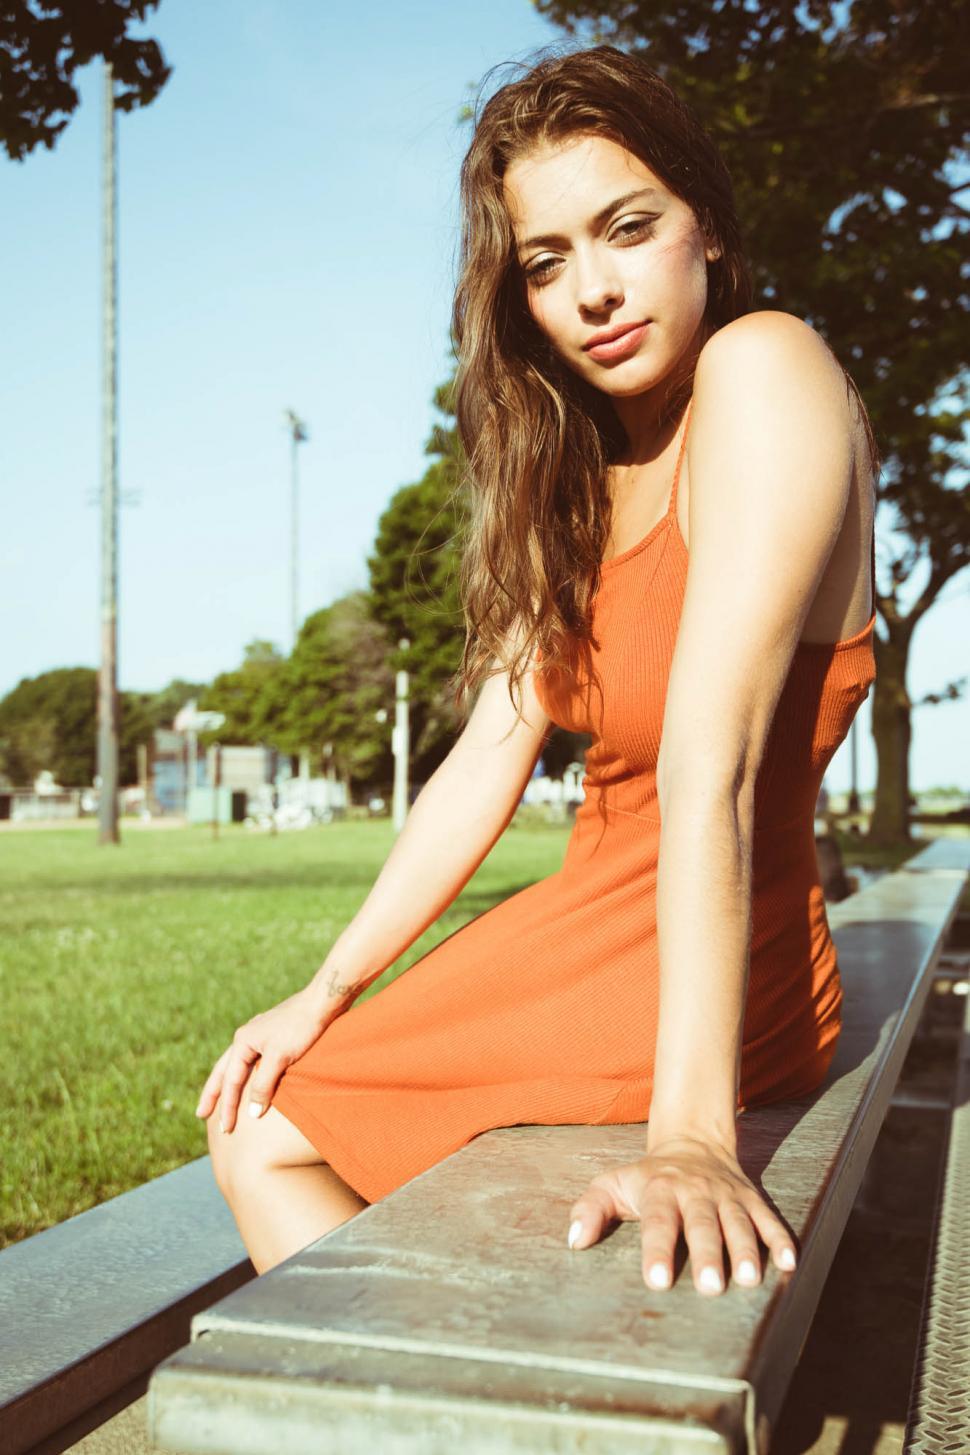 Free Image of Female fashion model posing in park - looking at camera 